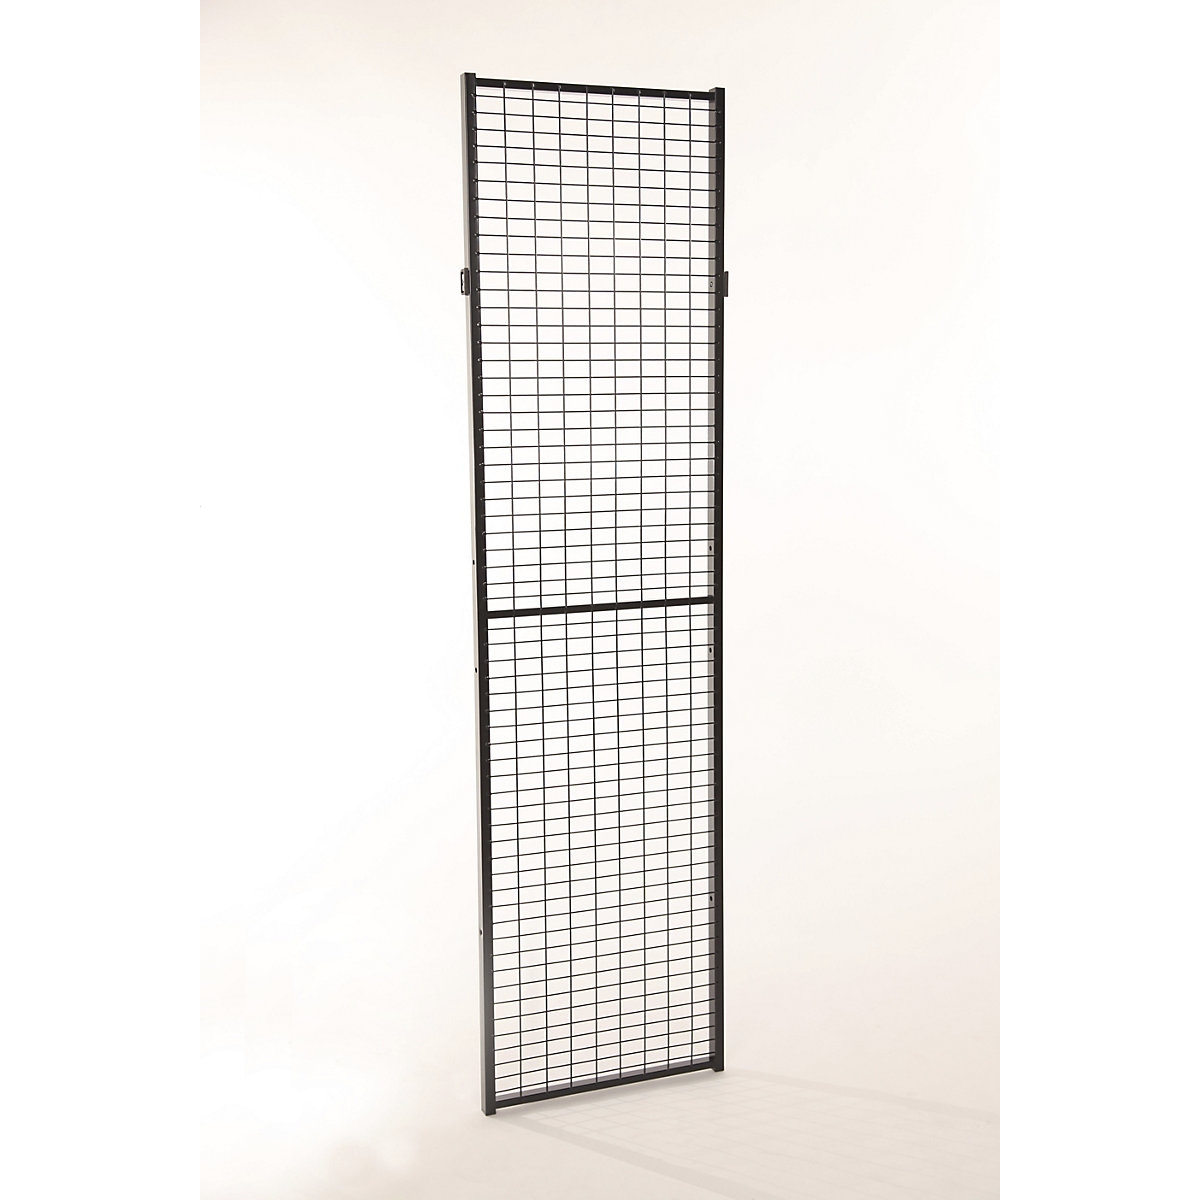 X-GUARD CLASSIC machine protective fencing, wall section - Axelent